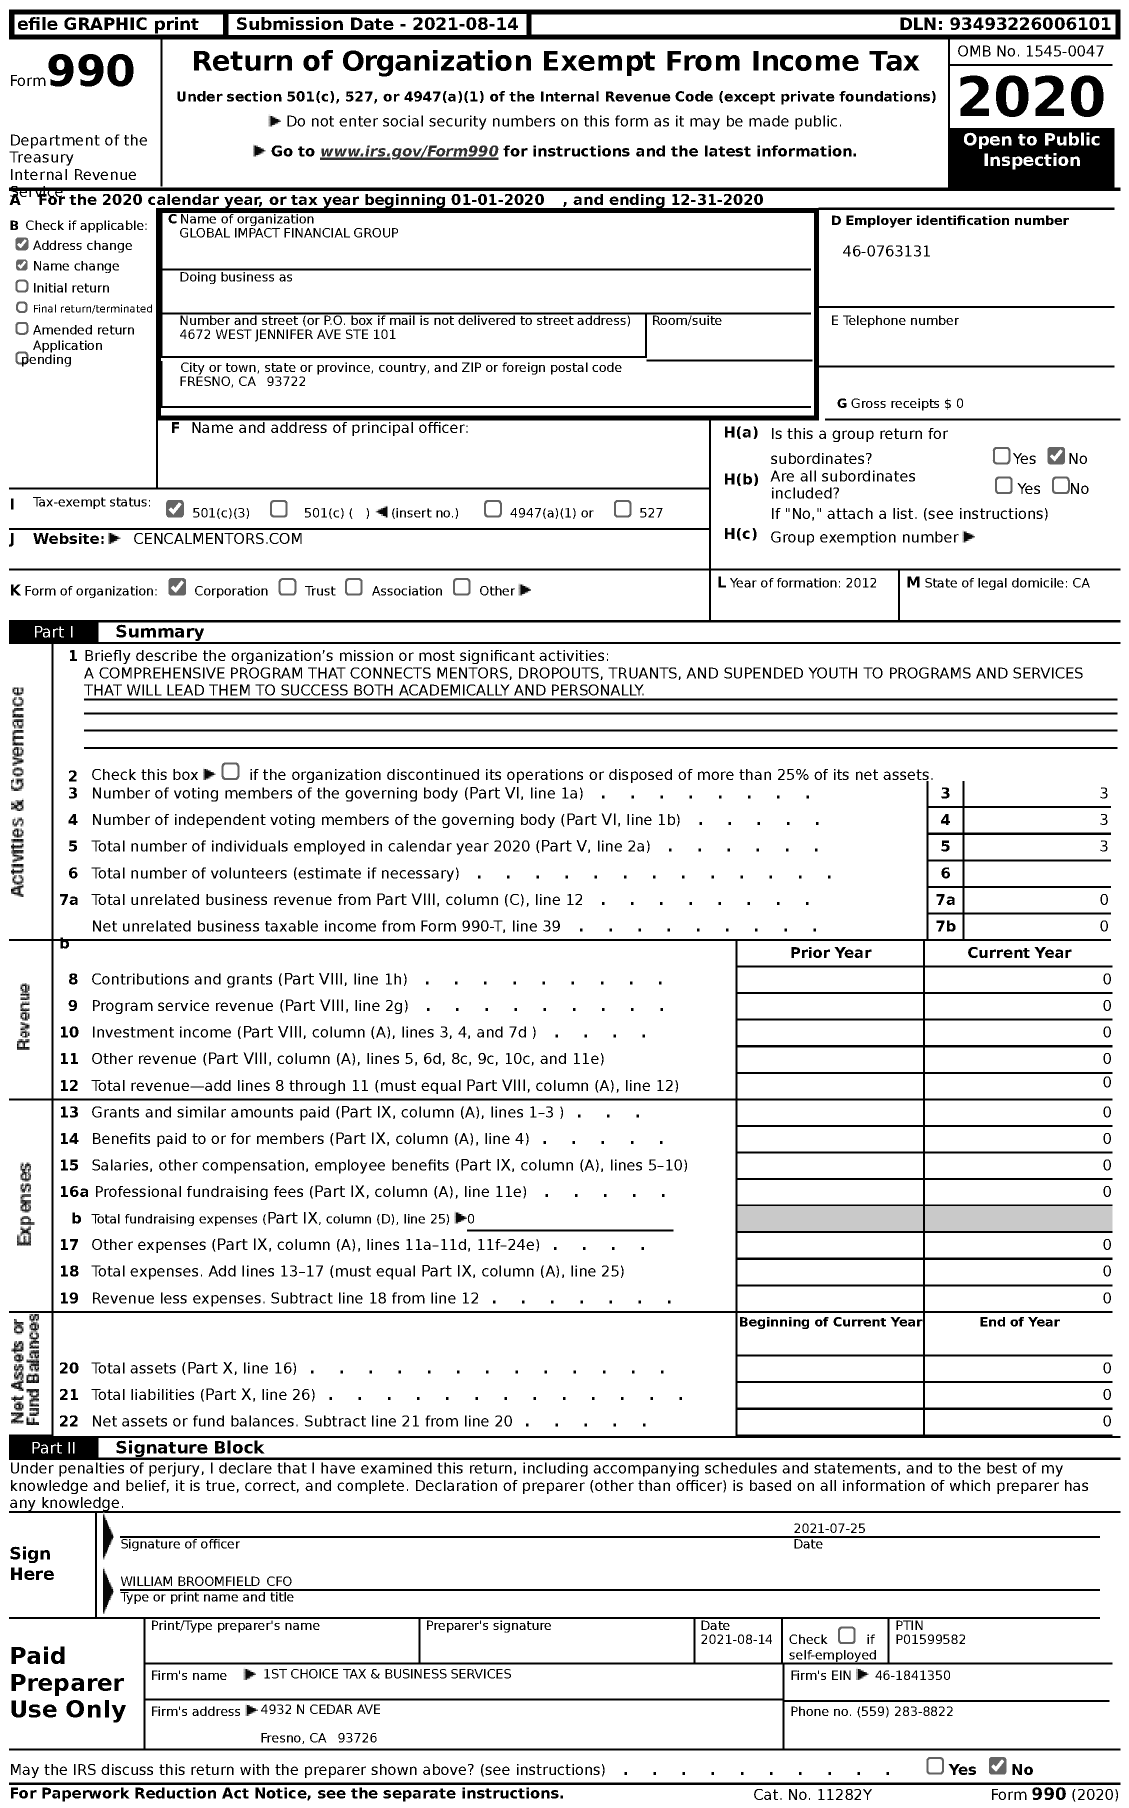 Image of first page of 2020 Form 990 for Global Impact Financial Group